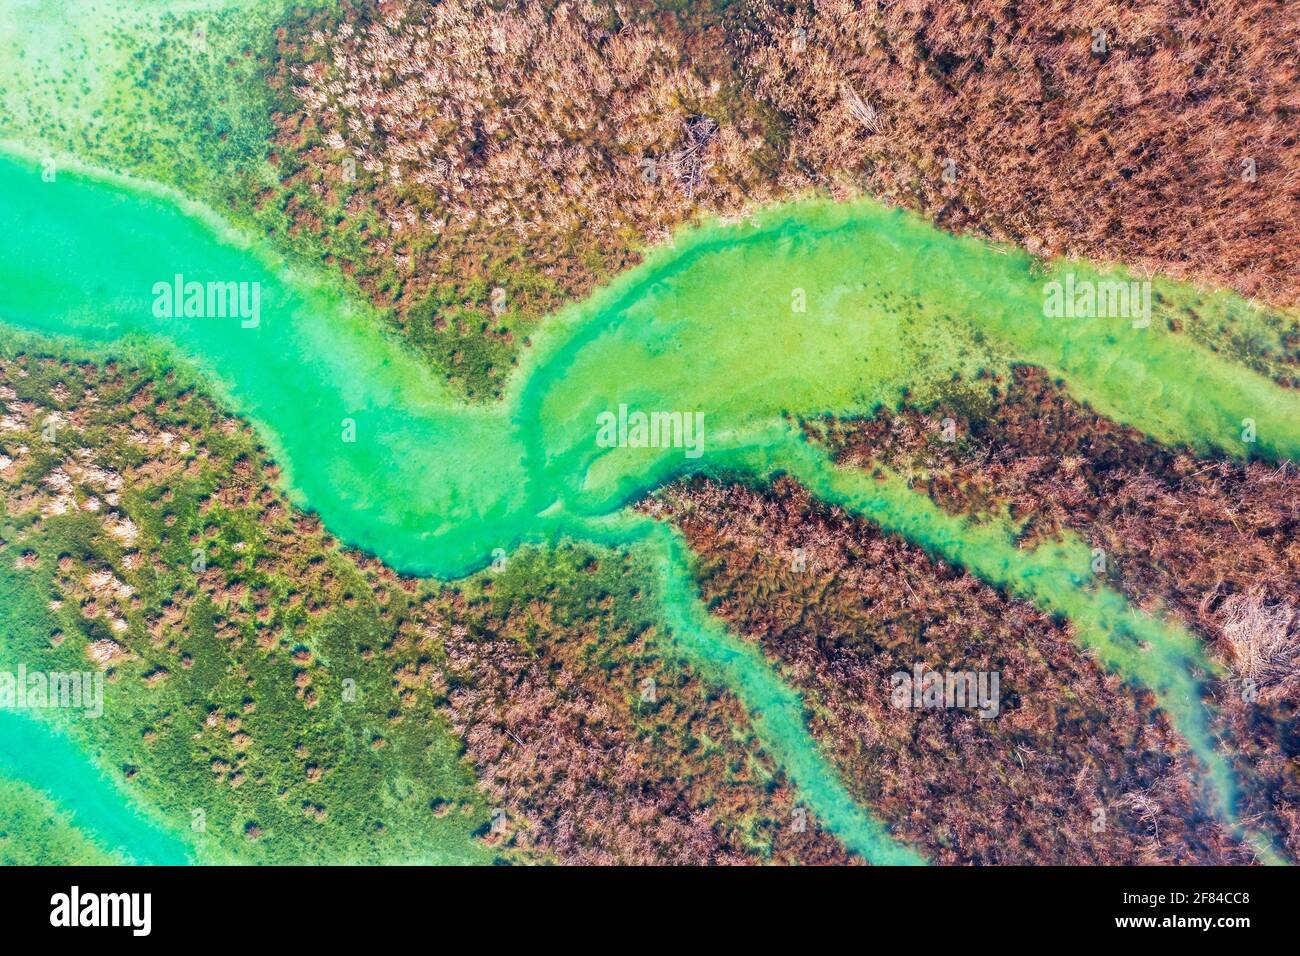 Isar at the inlet into the Sylvensteinsee, near Lenggries, Isarwinkel, drone image, Upper Bavaria, Bavaria, Germany Stock Photo